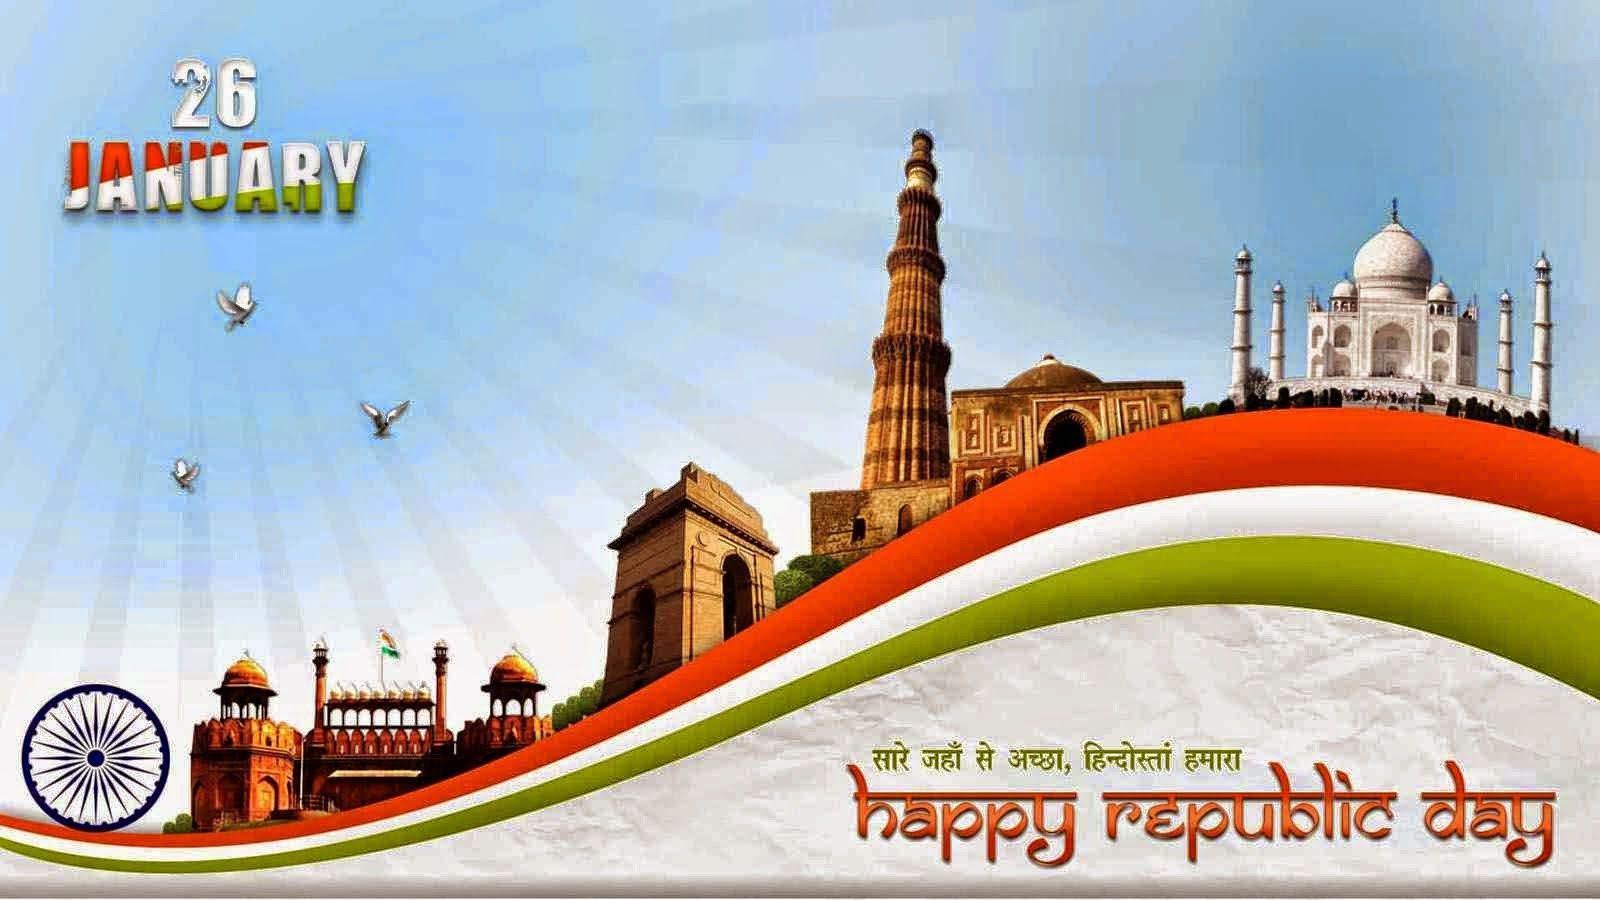 Happy Republic Day 2016 Image, Quotes, SMS